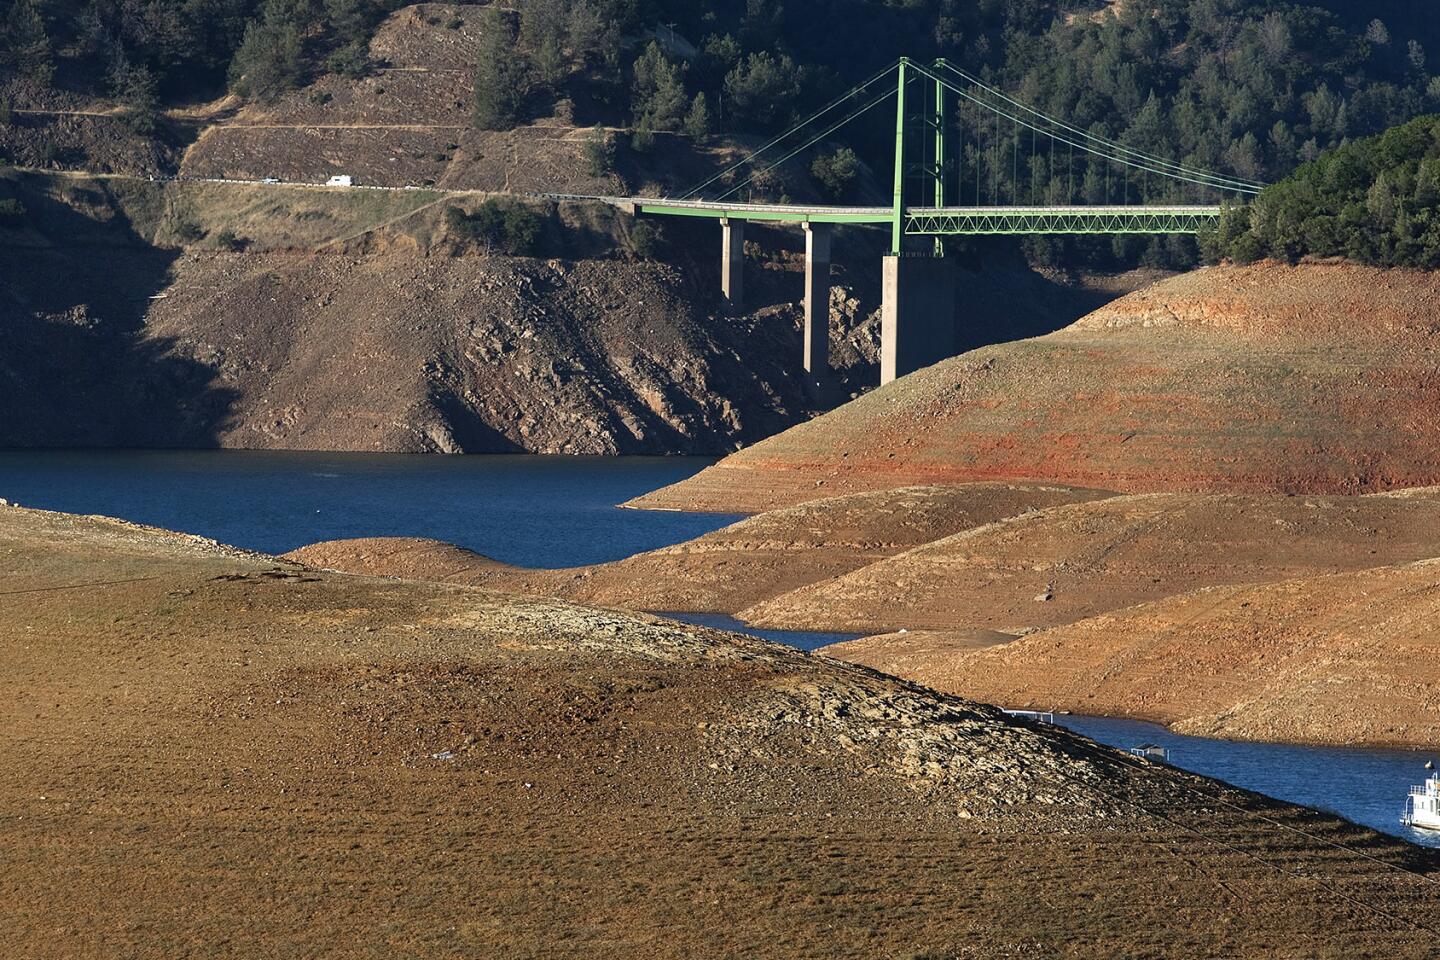 On Assignment: Focusing on the effects of California's persistent drought